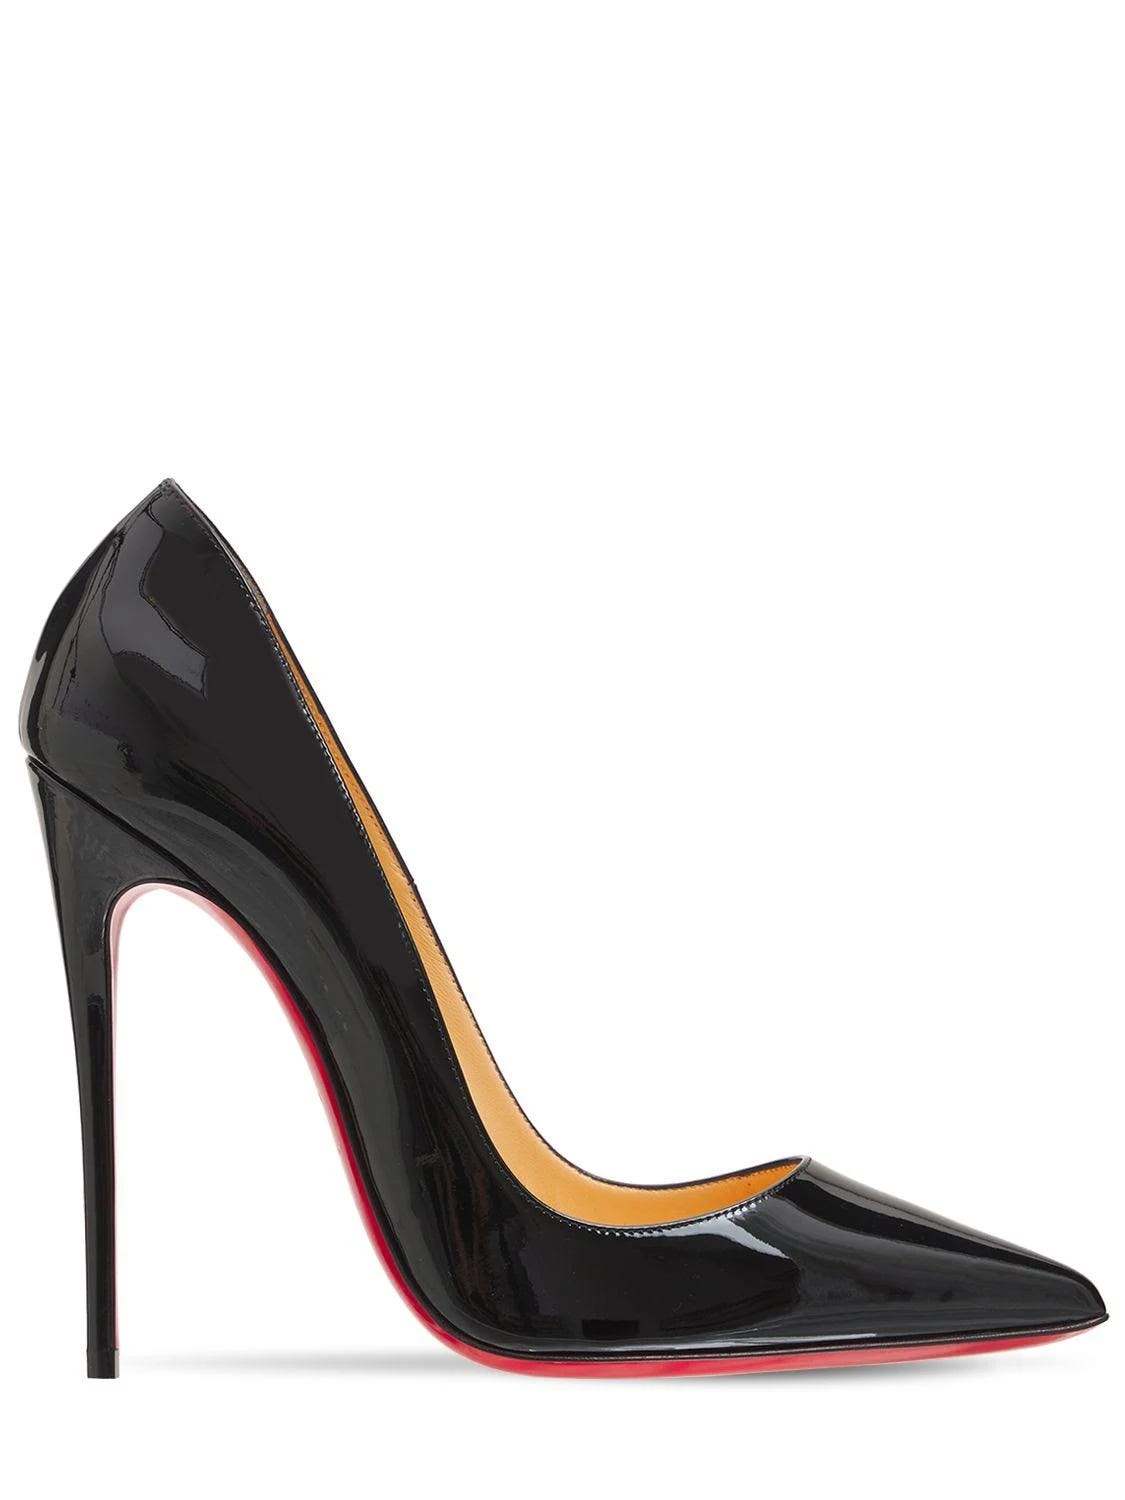 Luxurious So Kate Patent Leather Pumps by Christian Louboutin | Image